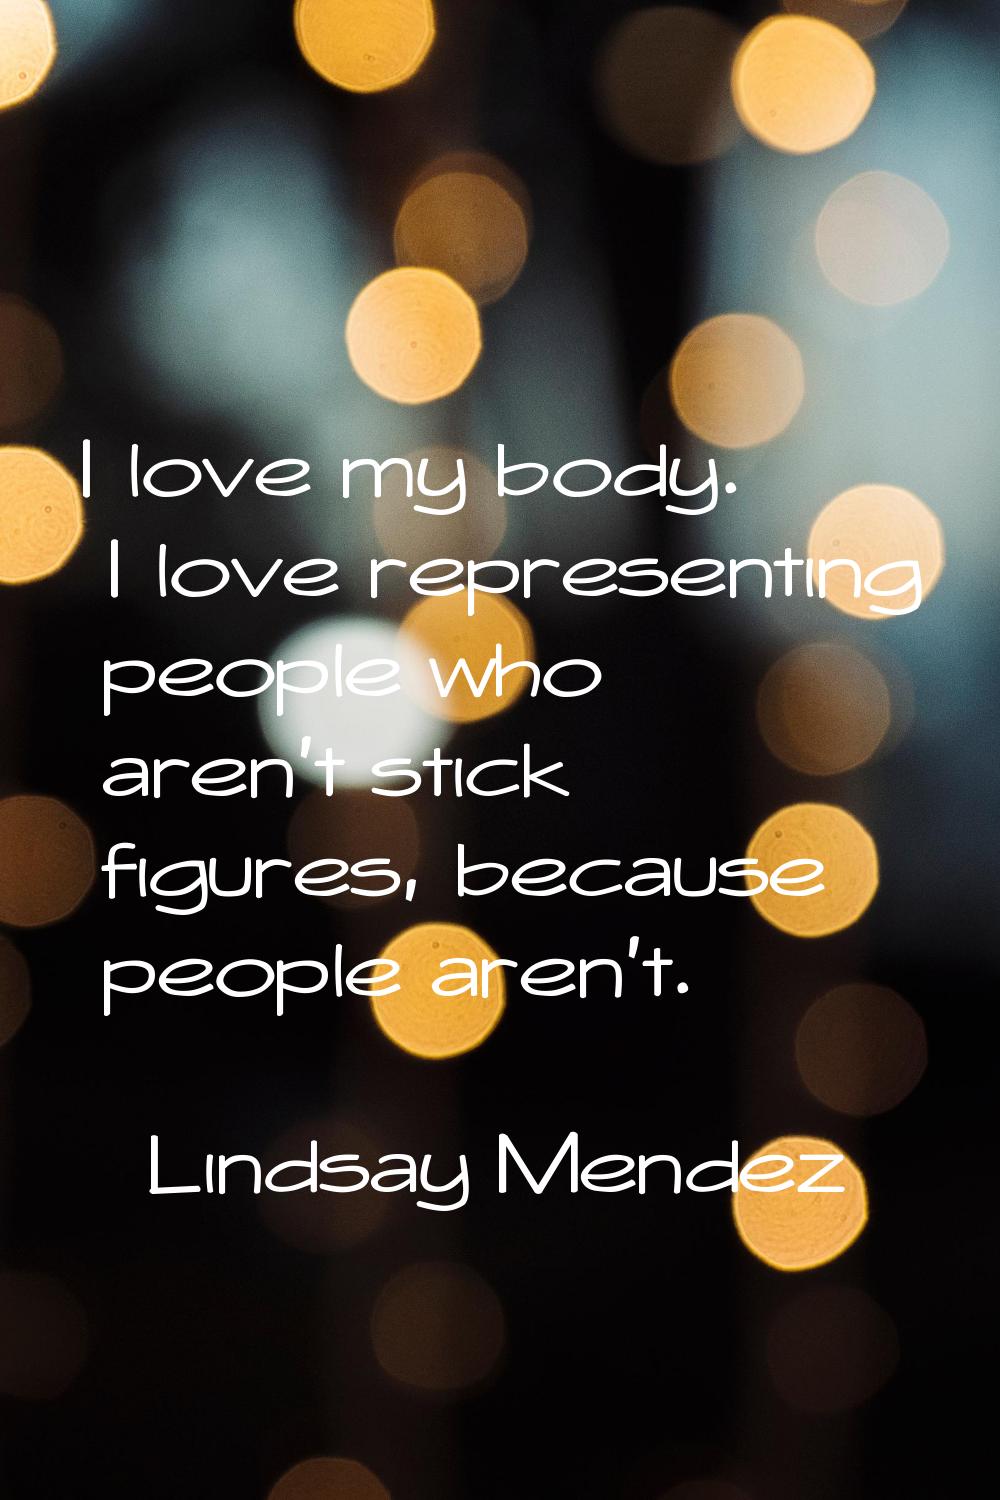 I love my body. I love representing people who aren't stick figures, because people aren't.